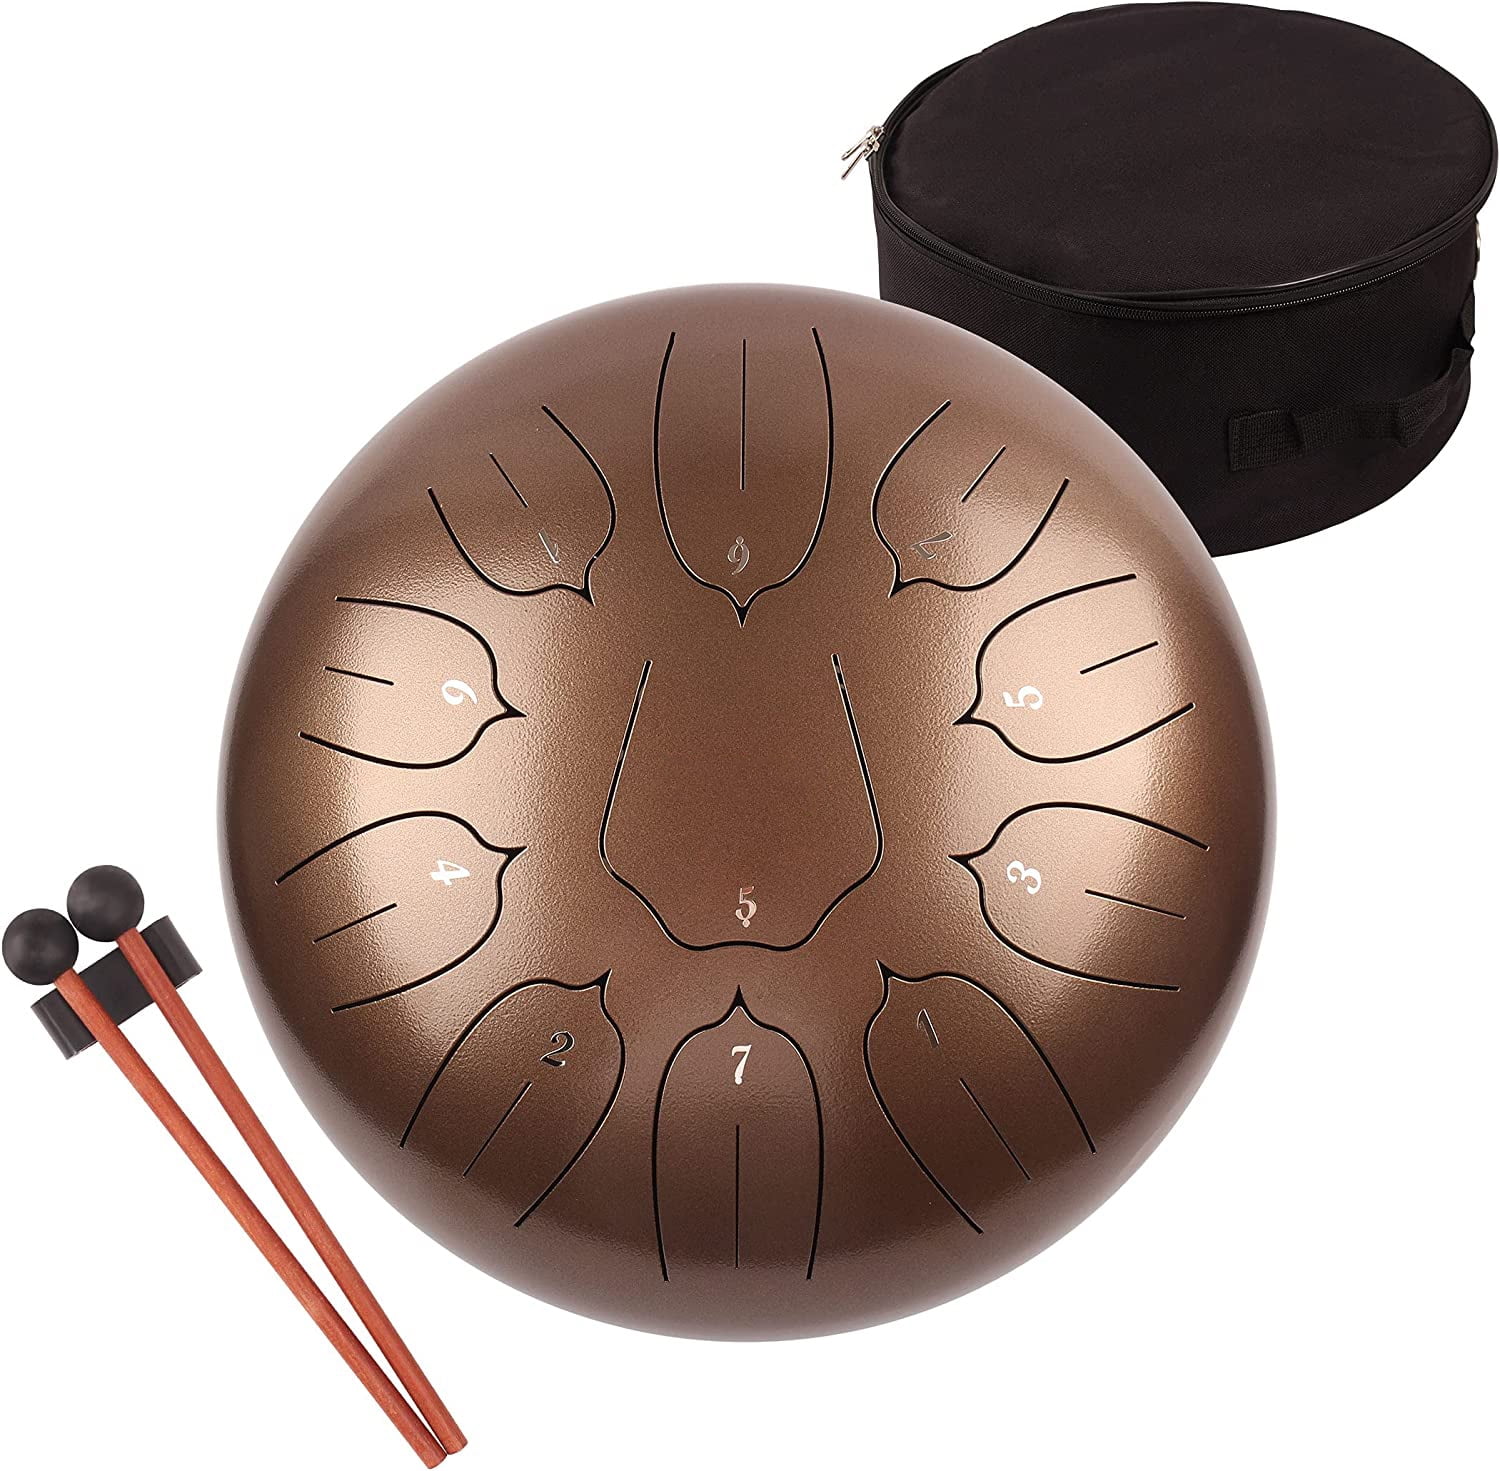 Harmonic Handpan Drum 9 Notes Steel Tongue Drum 22 Inches Percussion  Instrument for Sound Performance in Minor D Hand pan Steel Drum andmade  Healing